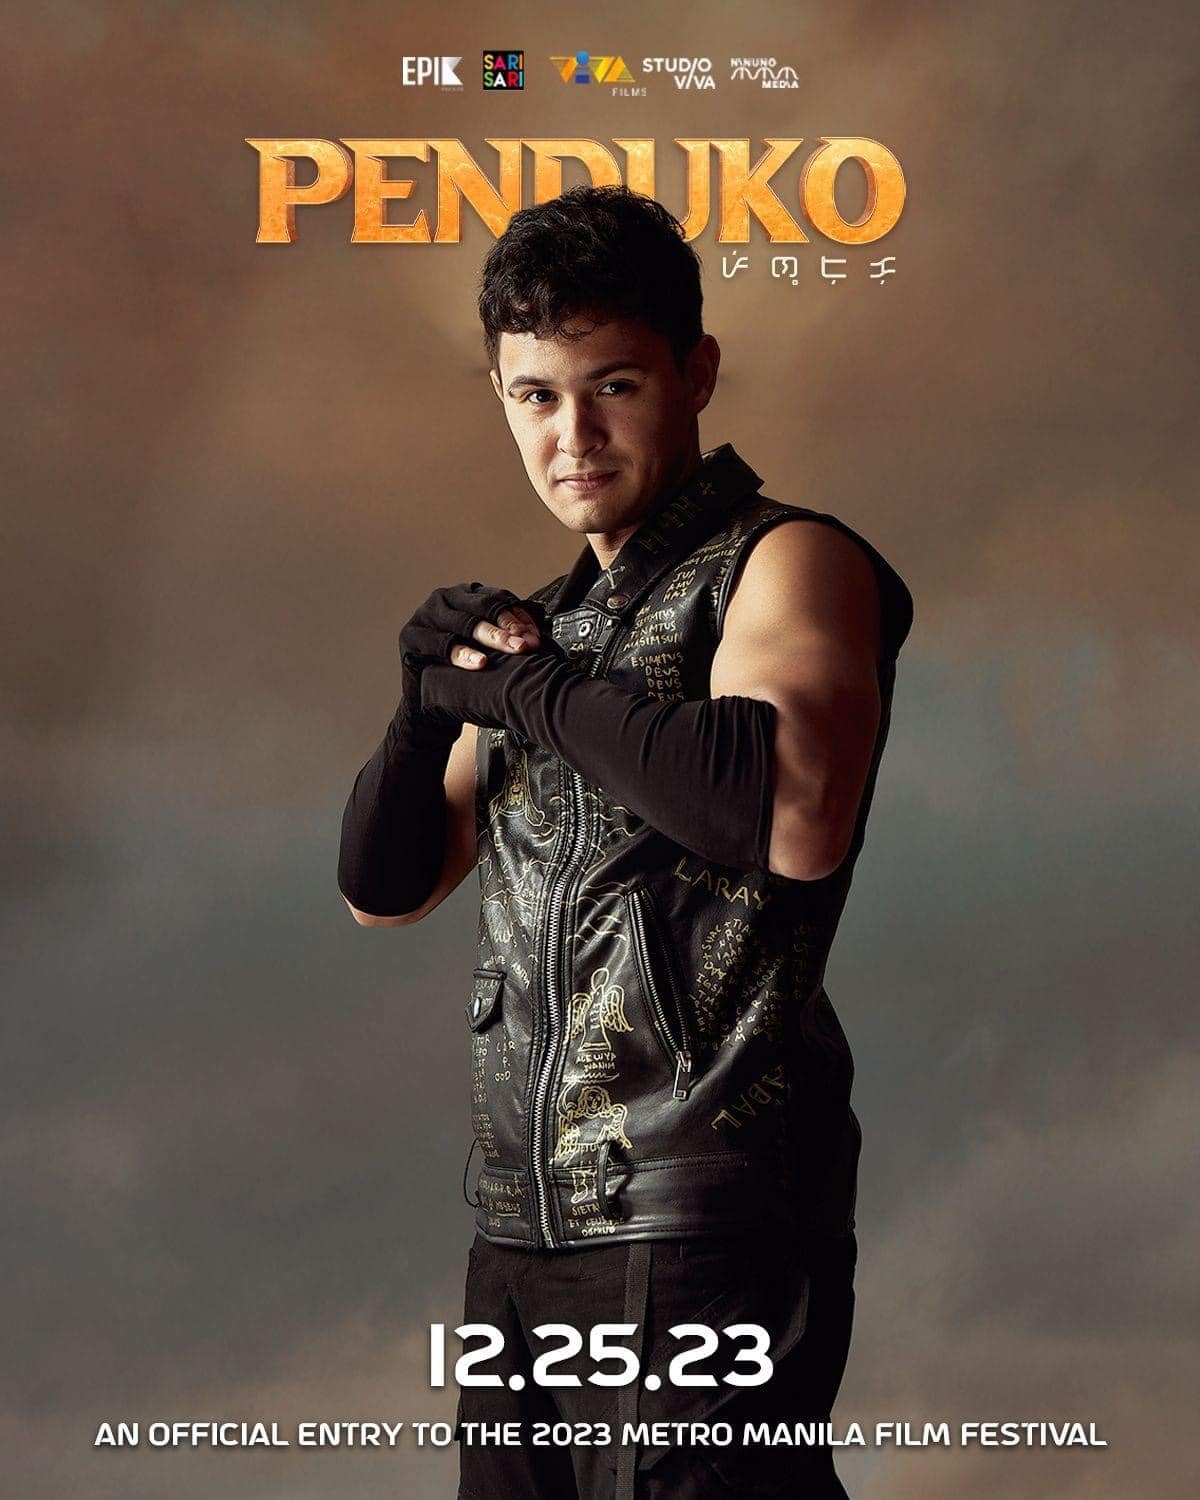 Extra Large Movie Poster Image for Penduko (#5 of 9)